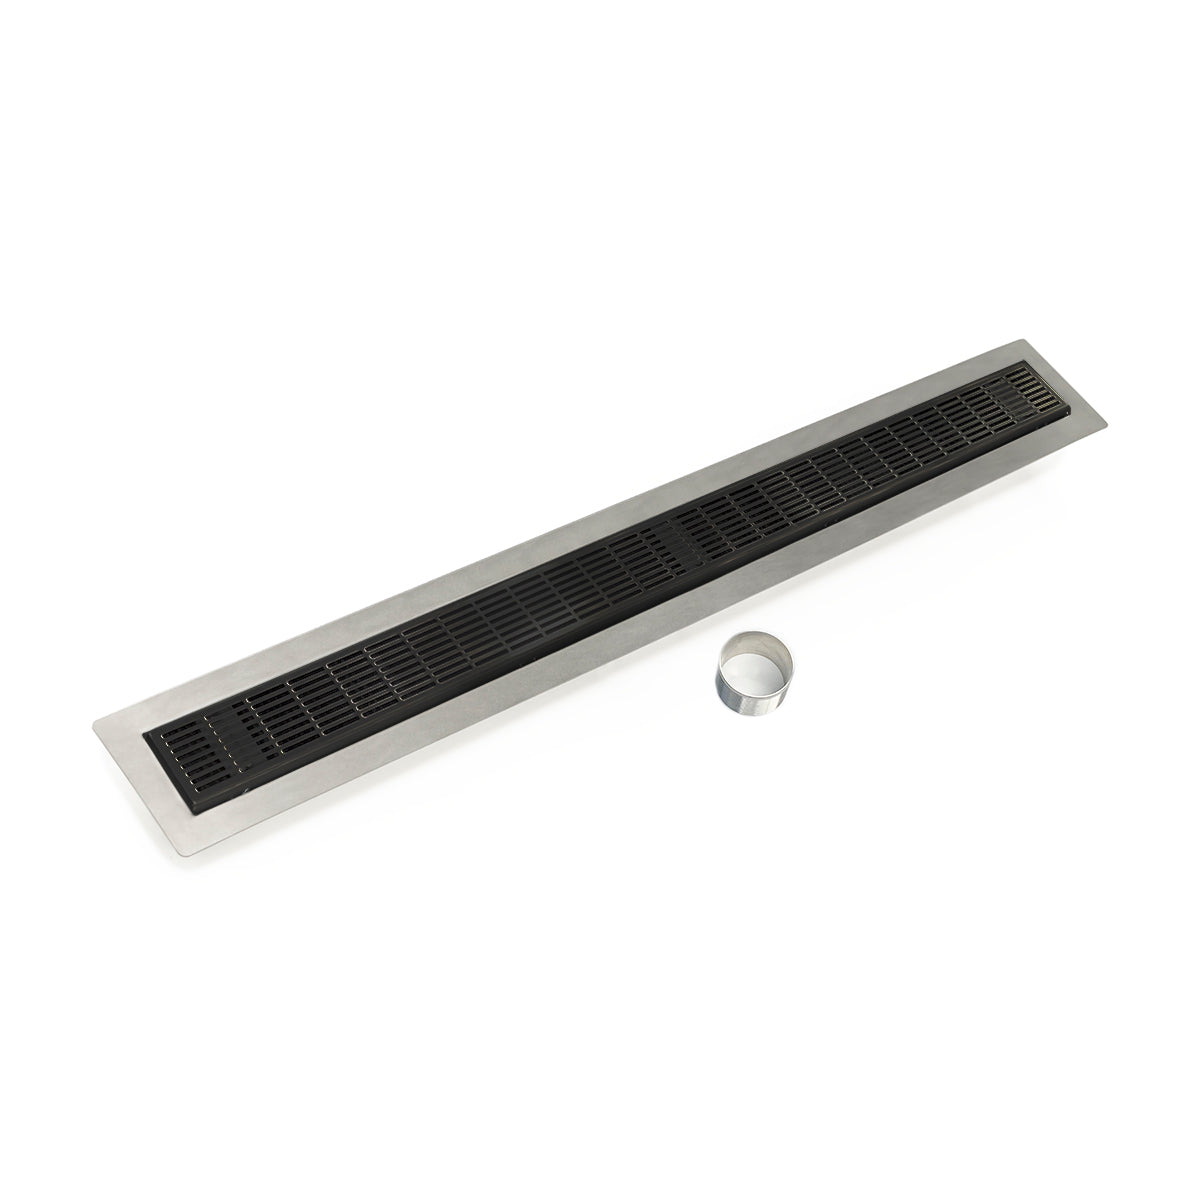 Infinity Drain 24" FCB Series Double Waterproofing Linear Drain Kit with 2 1/2" Perforated Slotted Grate